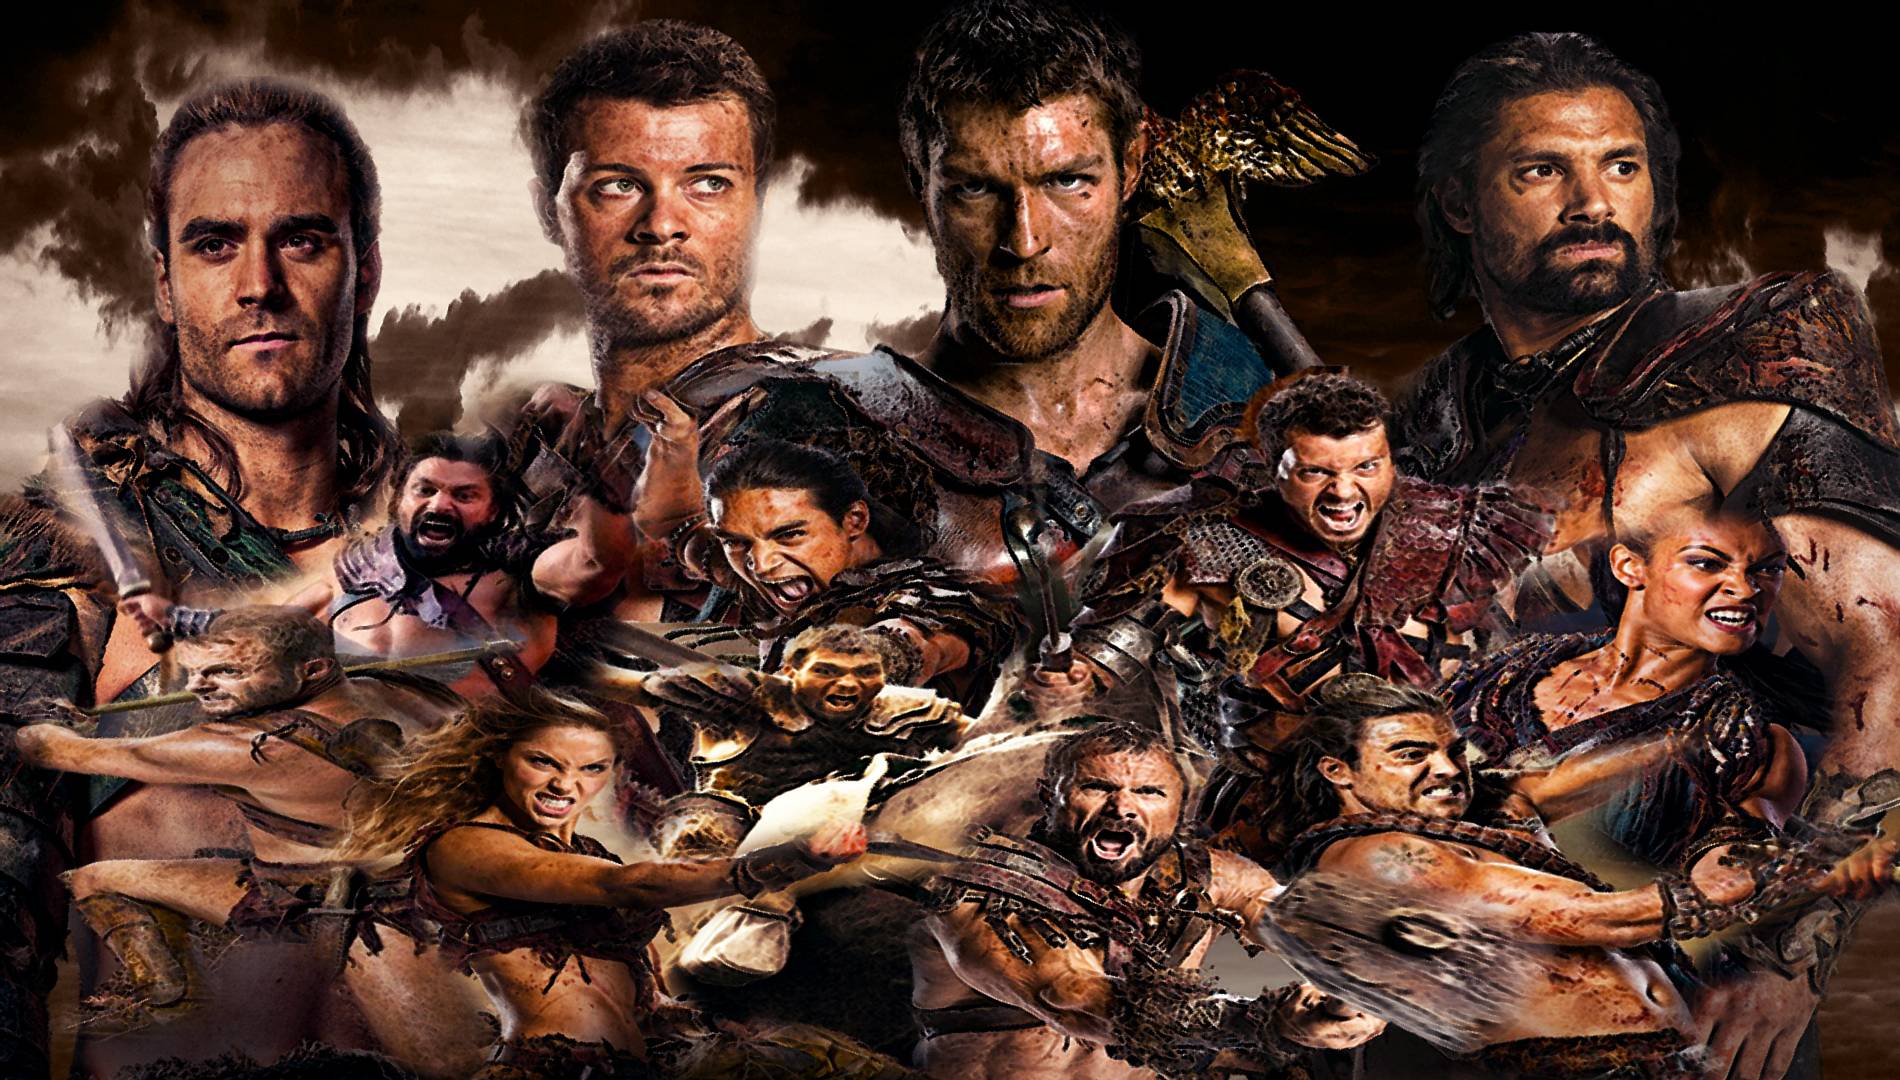 Spartacus: War Of The Damned Wallpaper. Spartacus: War Of